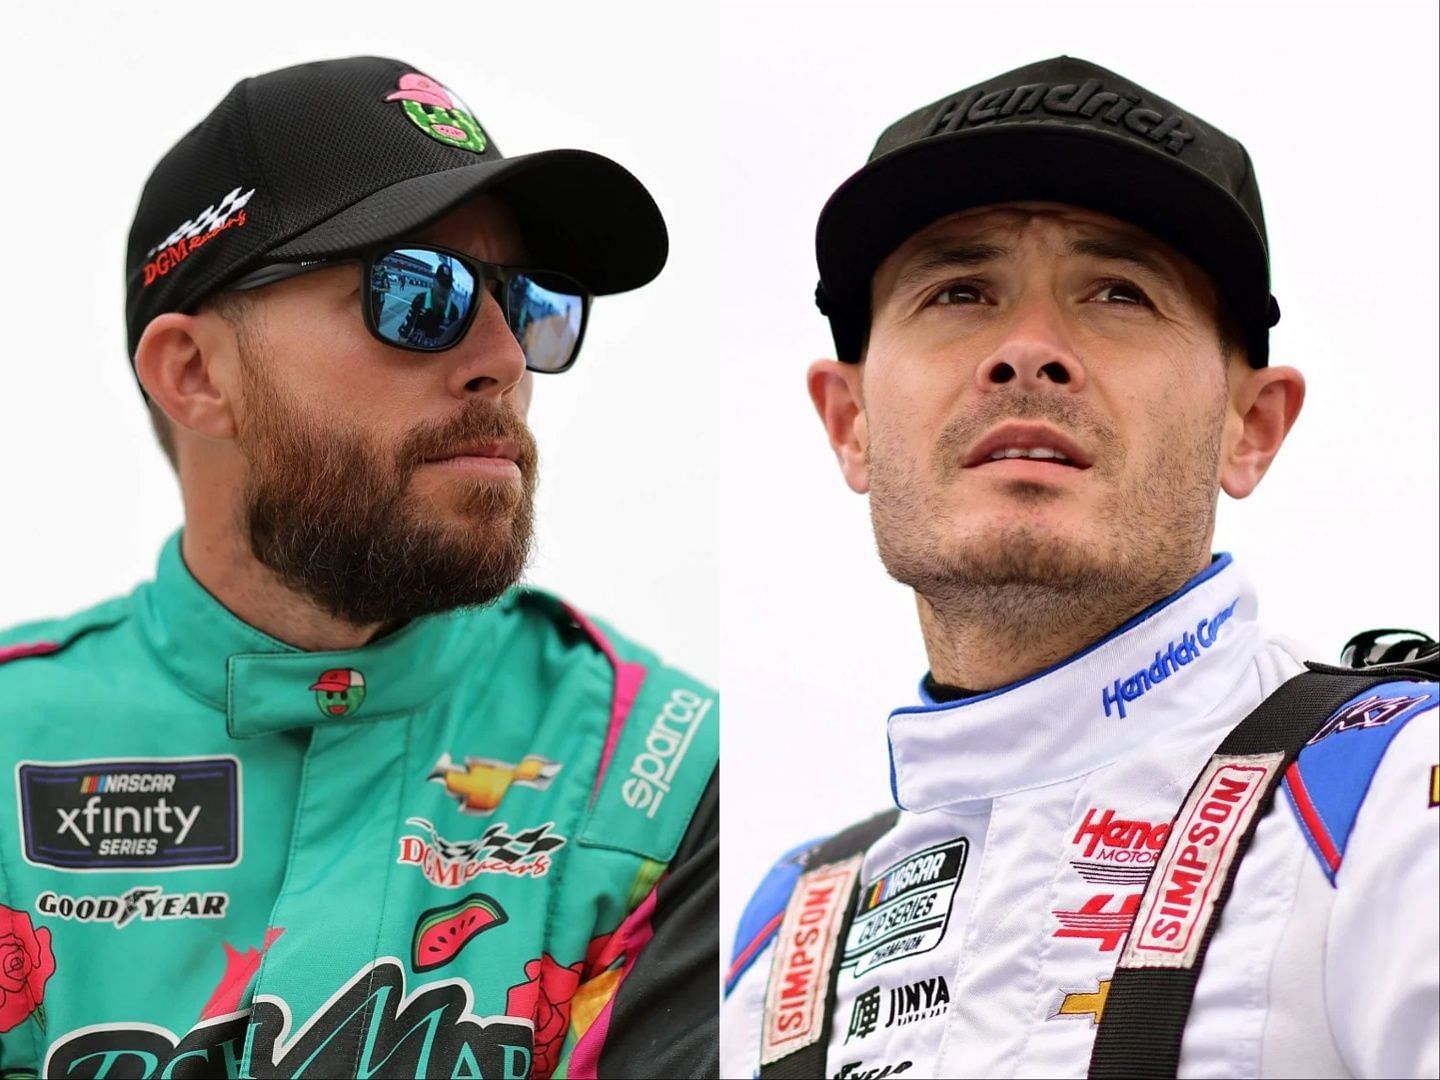 Ross Chastain and Kyle Larson (Image source Getty)